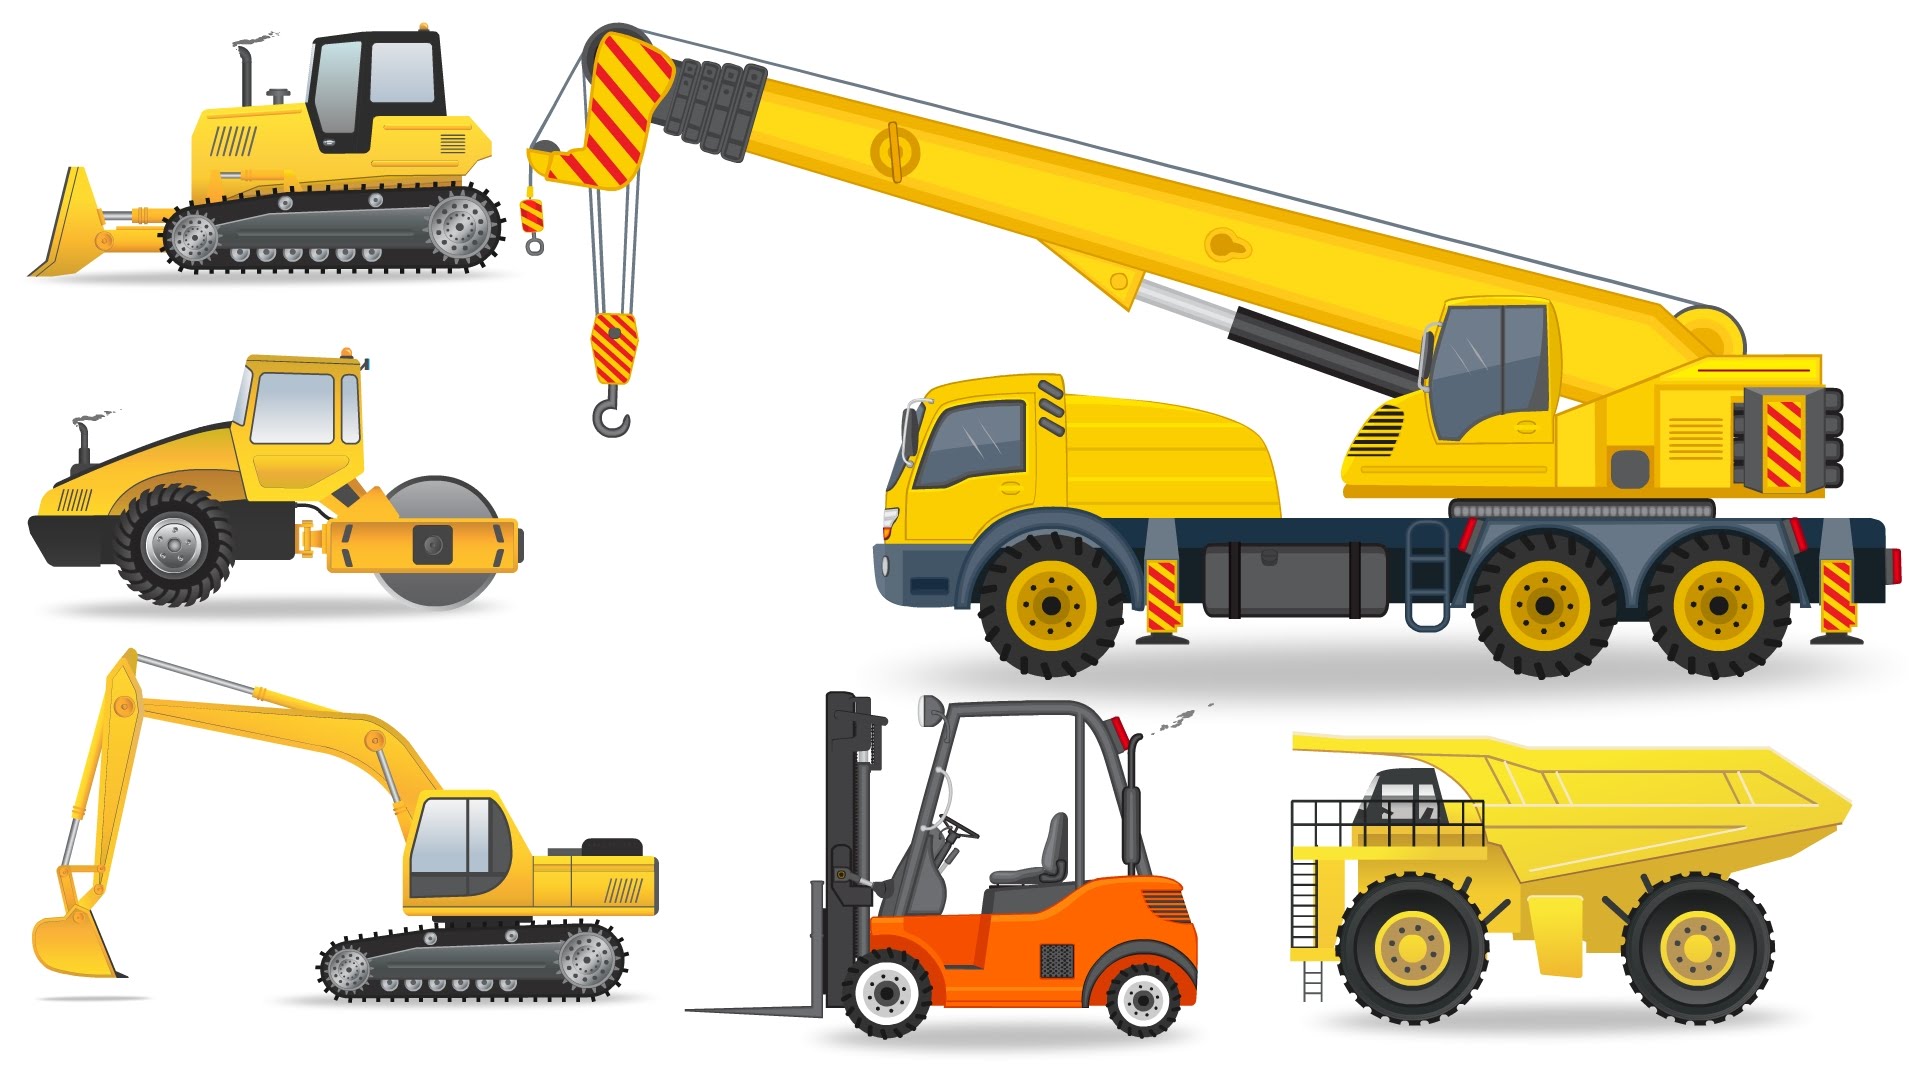 Construction Vehicle Clipart Equipment and other clipart images on Cliparts...